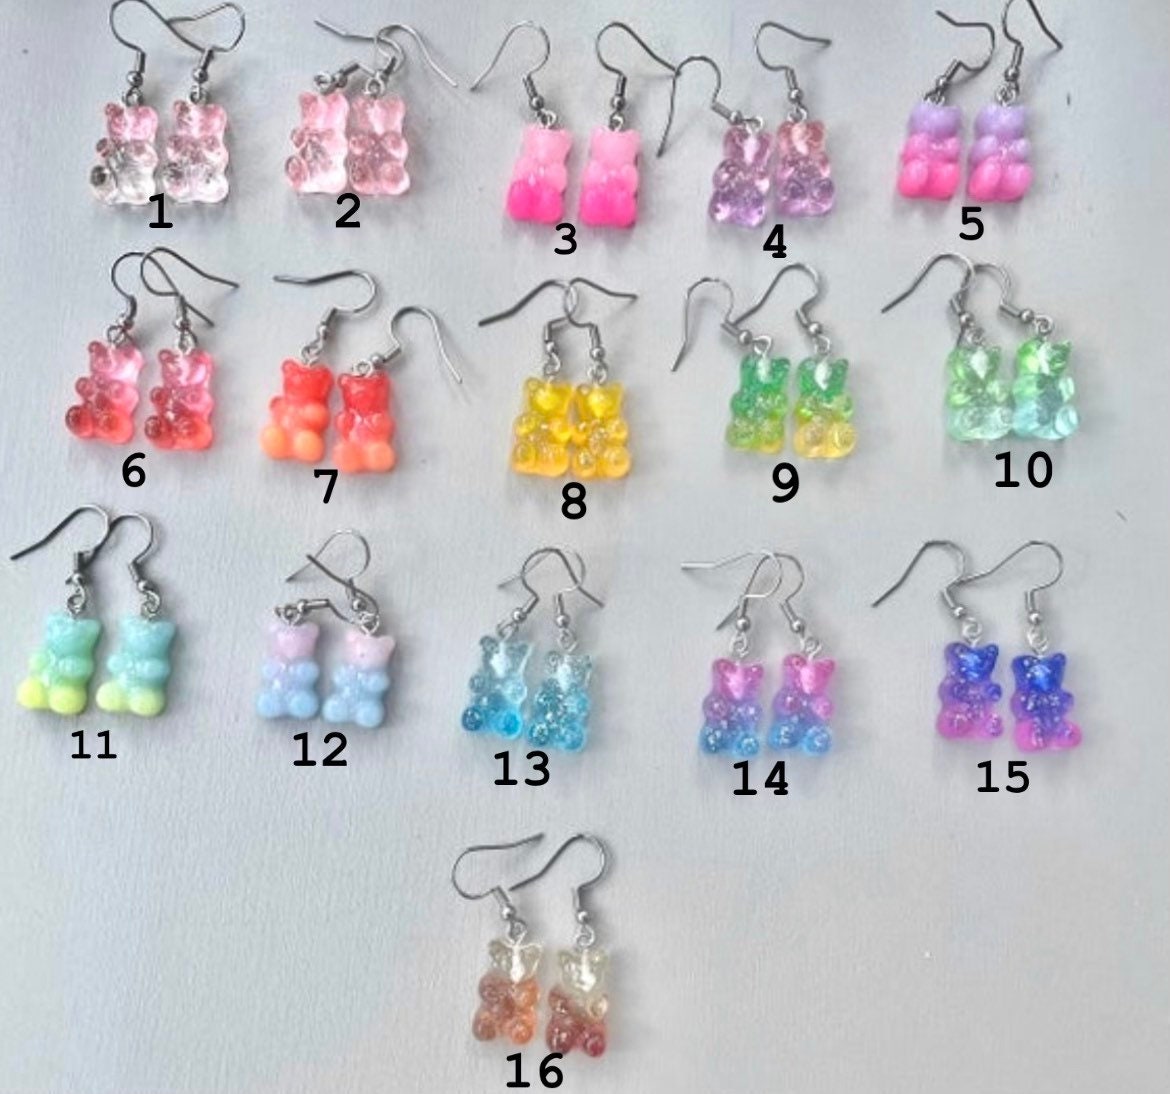 Resin Gummy Bear Beads for Earrings, Two-toned Gummy Bear Charms for  Jewelry Making, Candy Charms, Gummy Bear Pendants, Animal Beads 